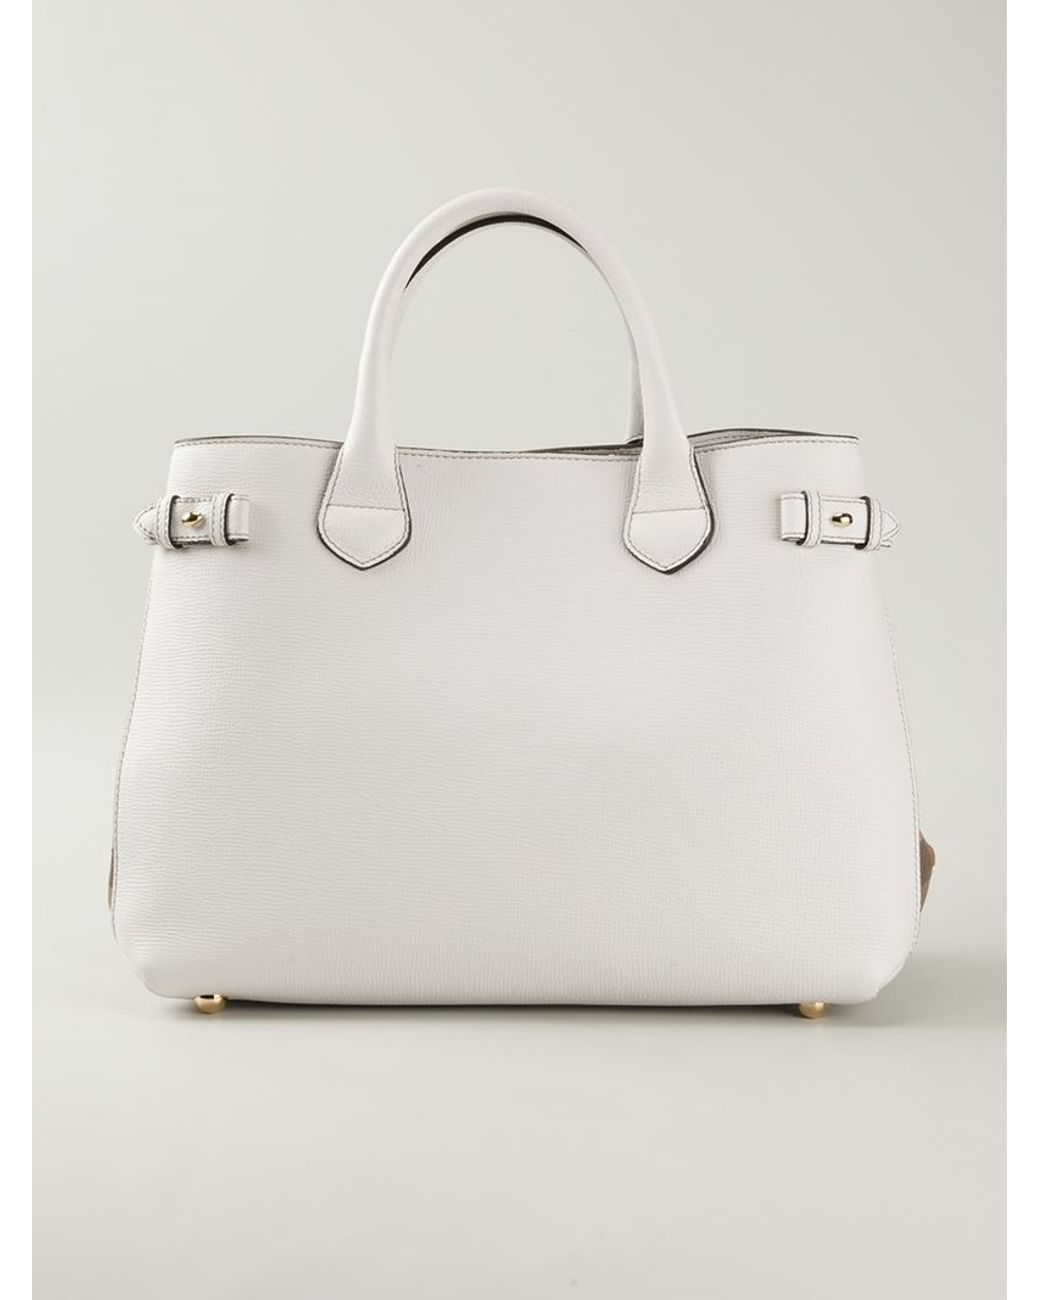 Burberry Leather Medium 'banner' Tote in White | Lyst